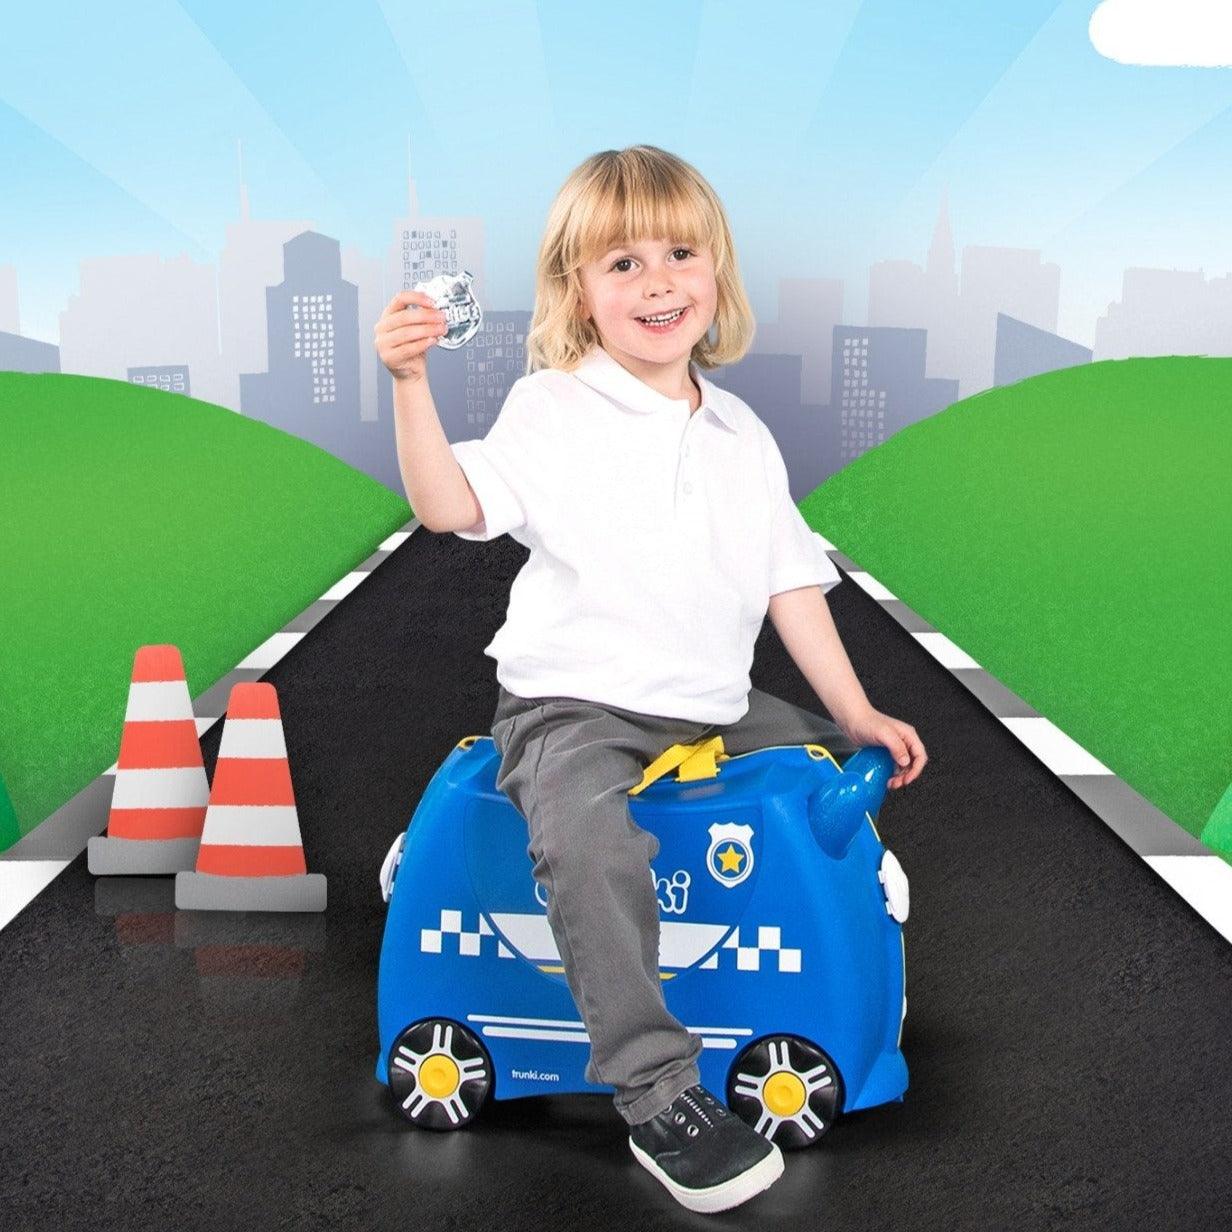 Trunki: Made Made for Kids Police Car Percy